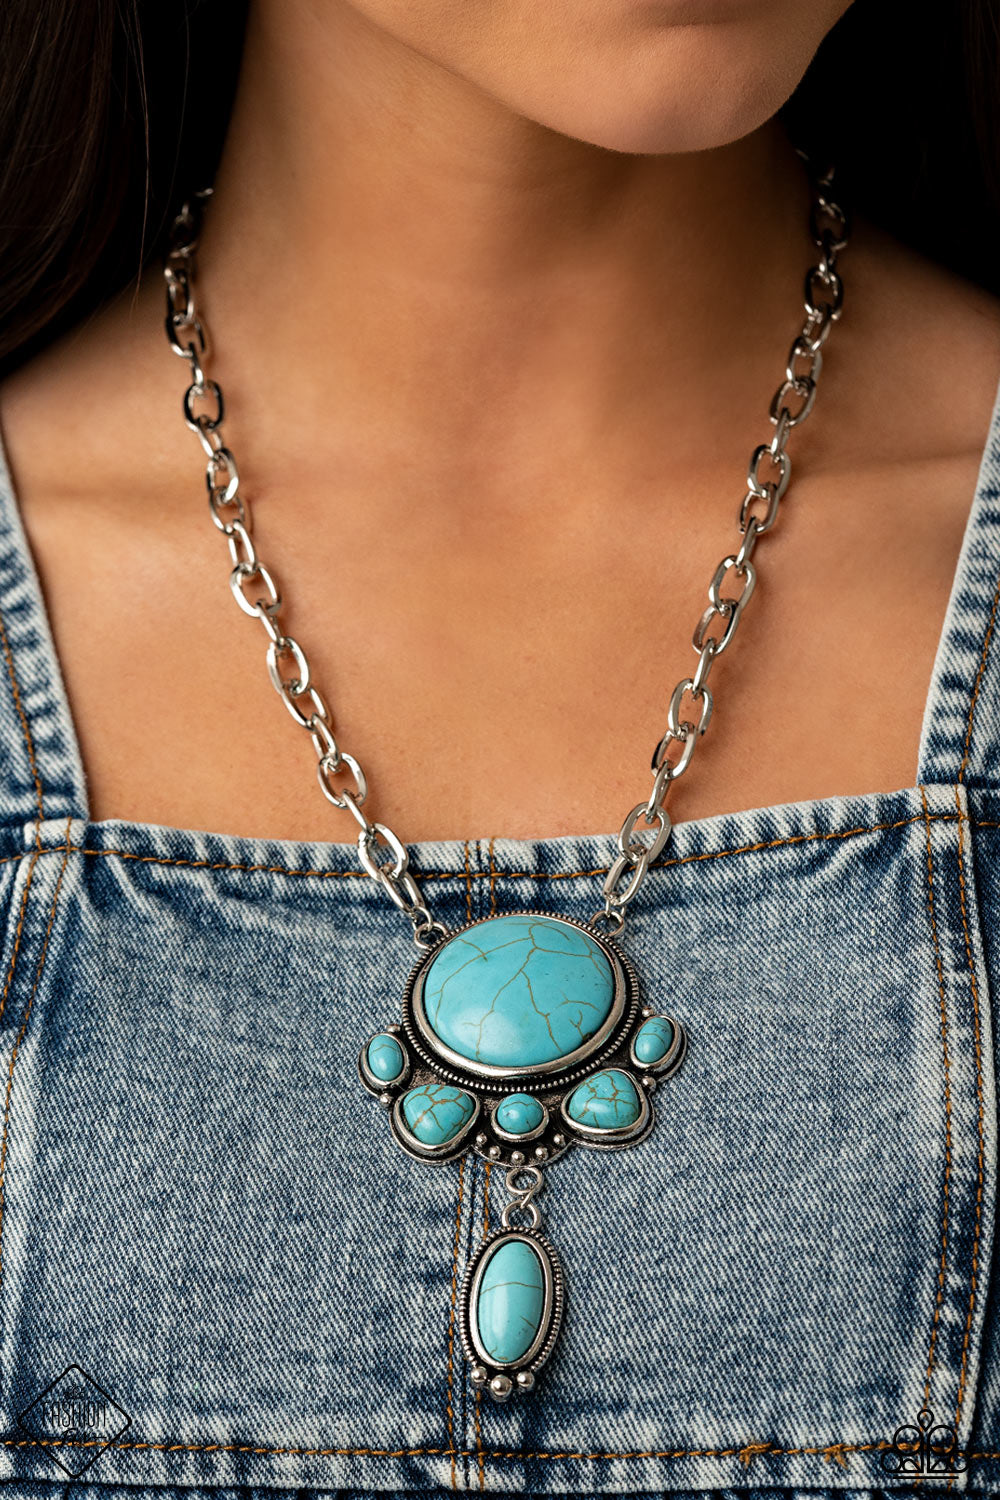 Geographically Gorgeous - Blue Crackle Necklace Paparazzi